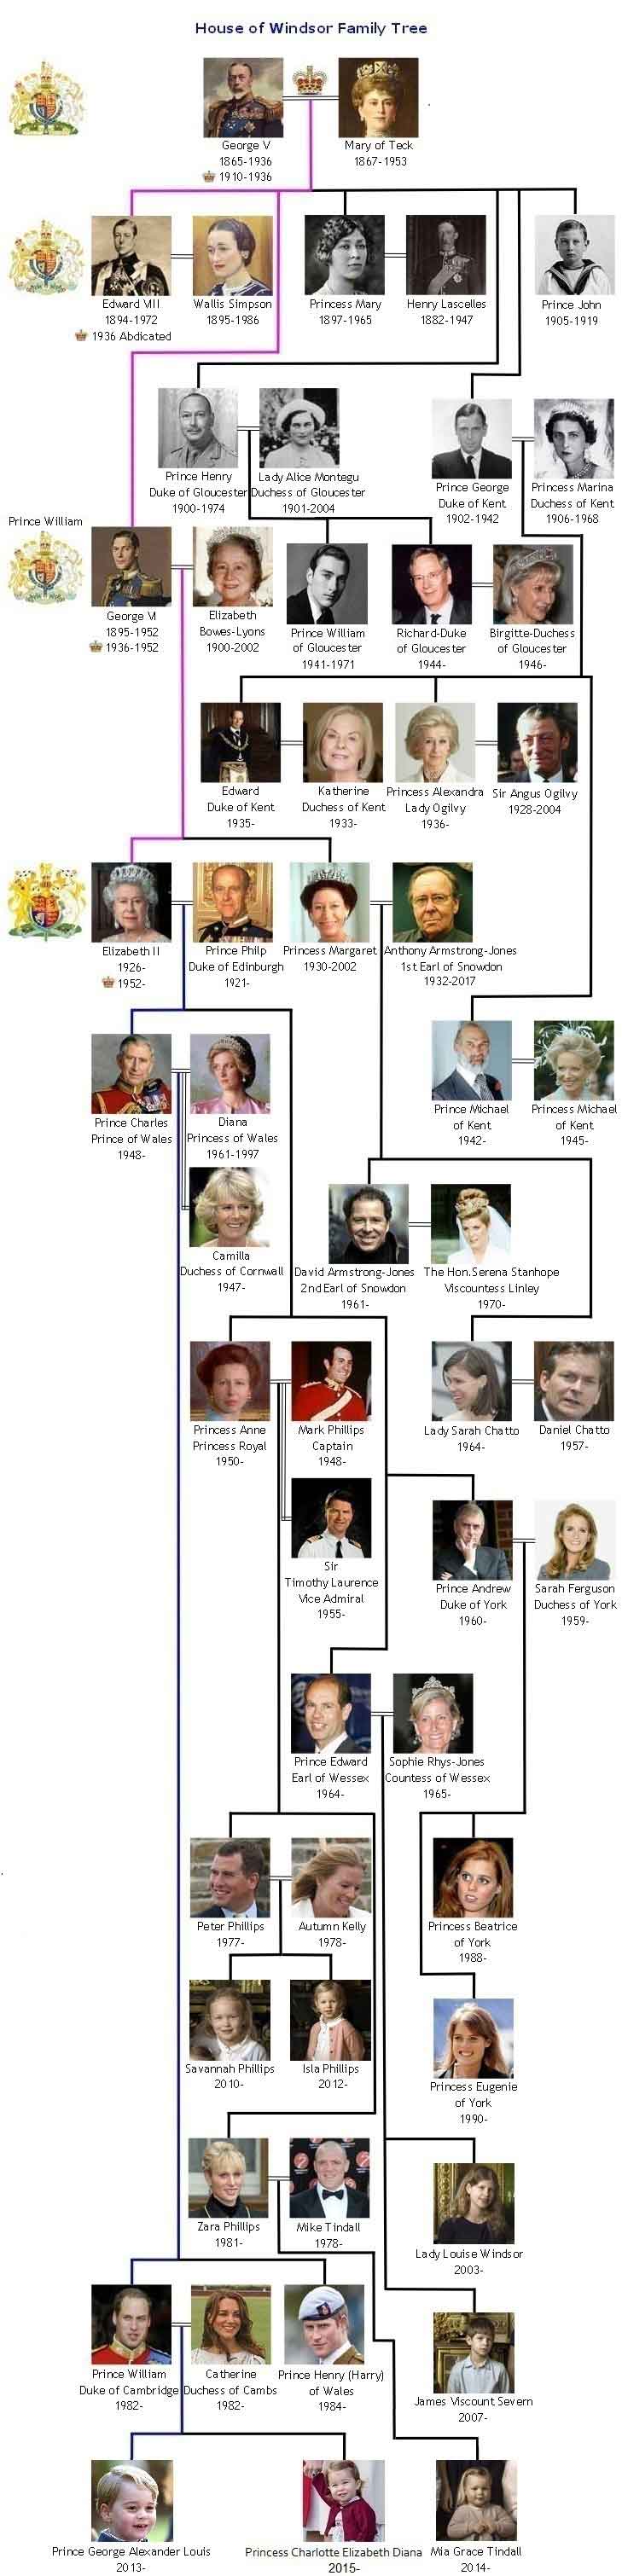 The House of Windsor British Royal Family Tree